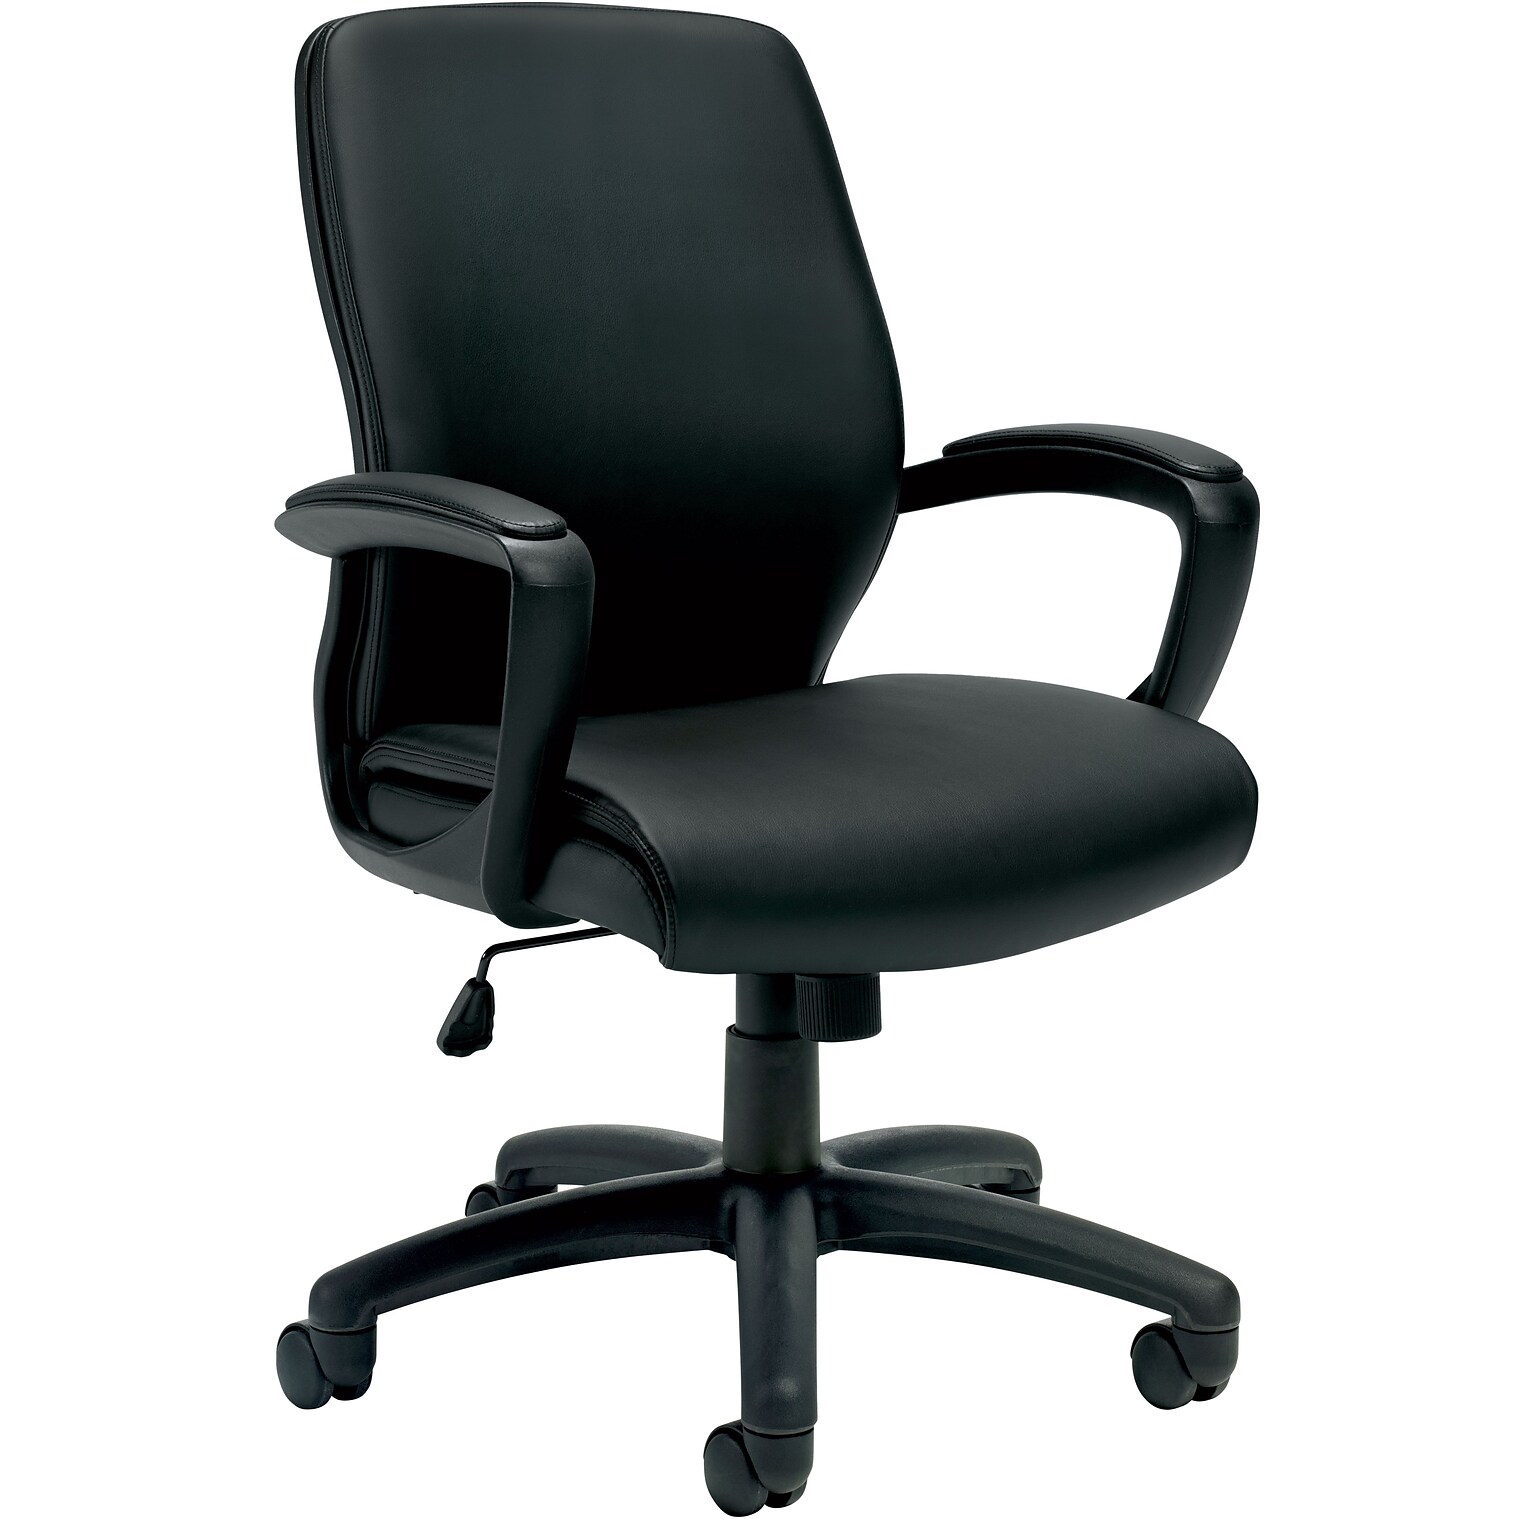 Offices To Go Luxhide Managerial Chair, Black (OTG11975B)